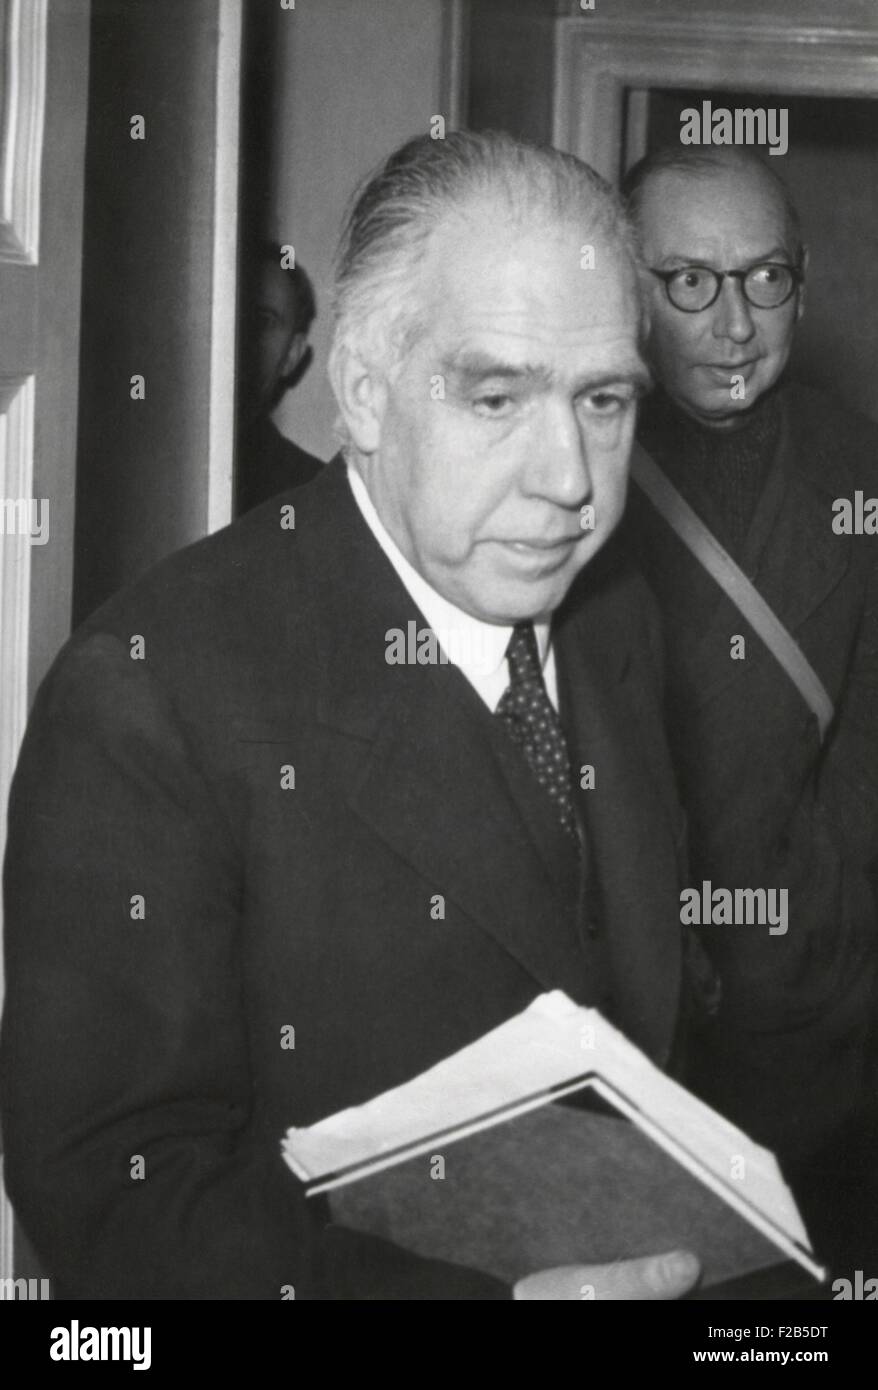 Niels Bohr, Danish nuclear physicist who escaped Nazi imprisonment in 1943. Ca. 1945. - (BSLOC 2014 17 24) Stock Photo